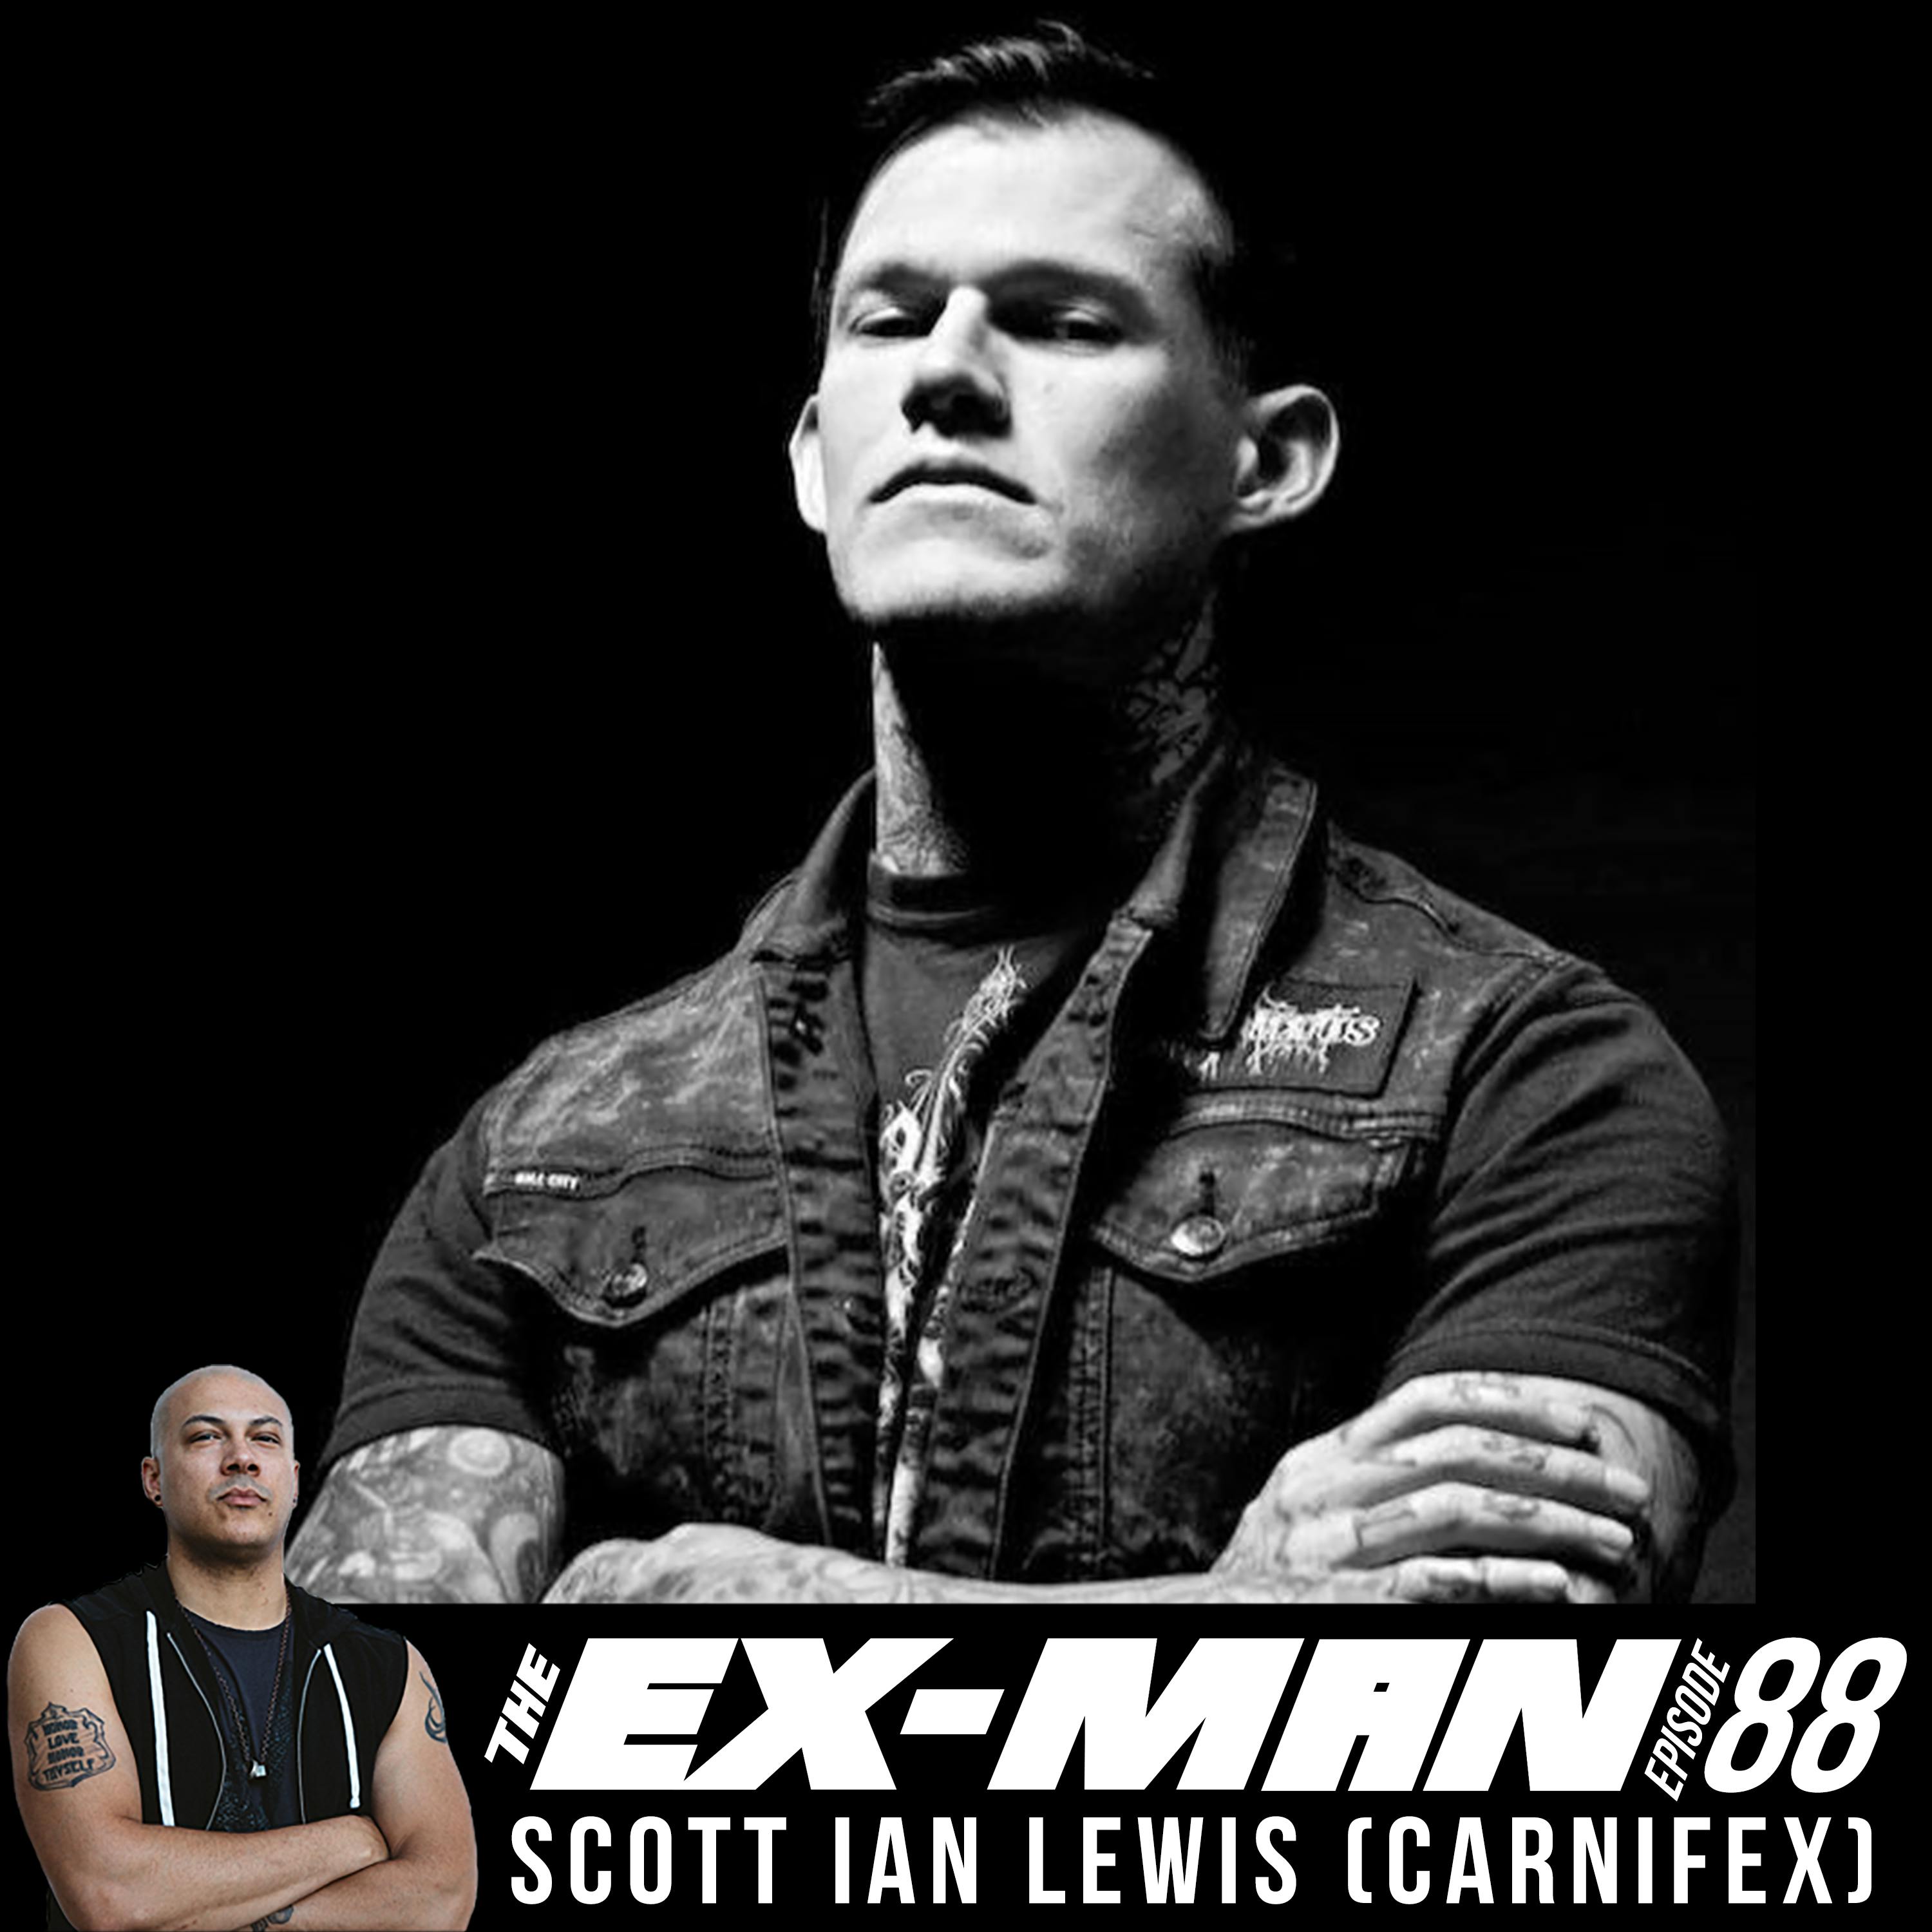 Discussing Lords of Chaos w/ Scott Ian Lewis (Carnifex)